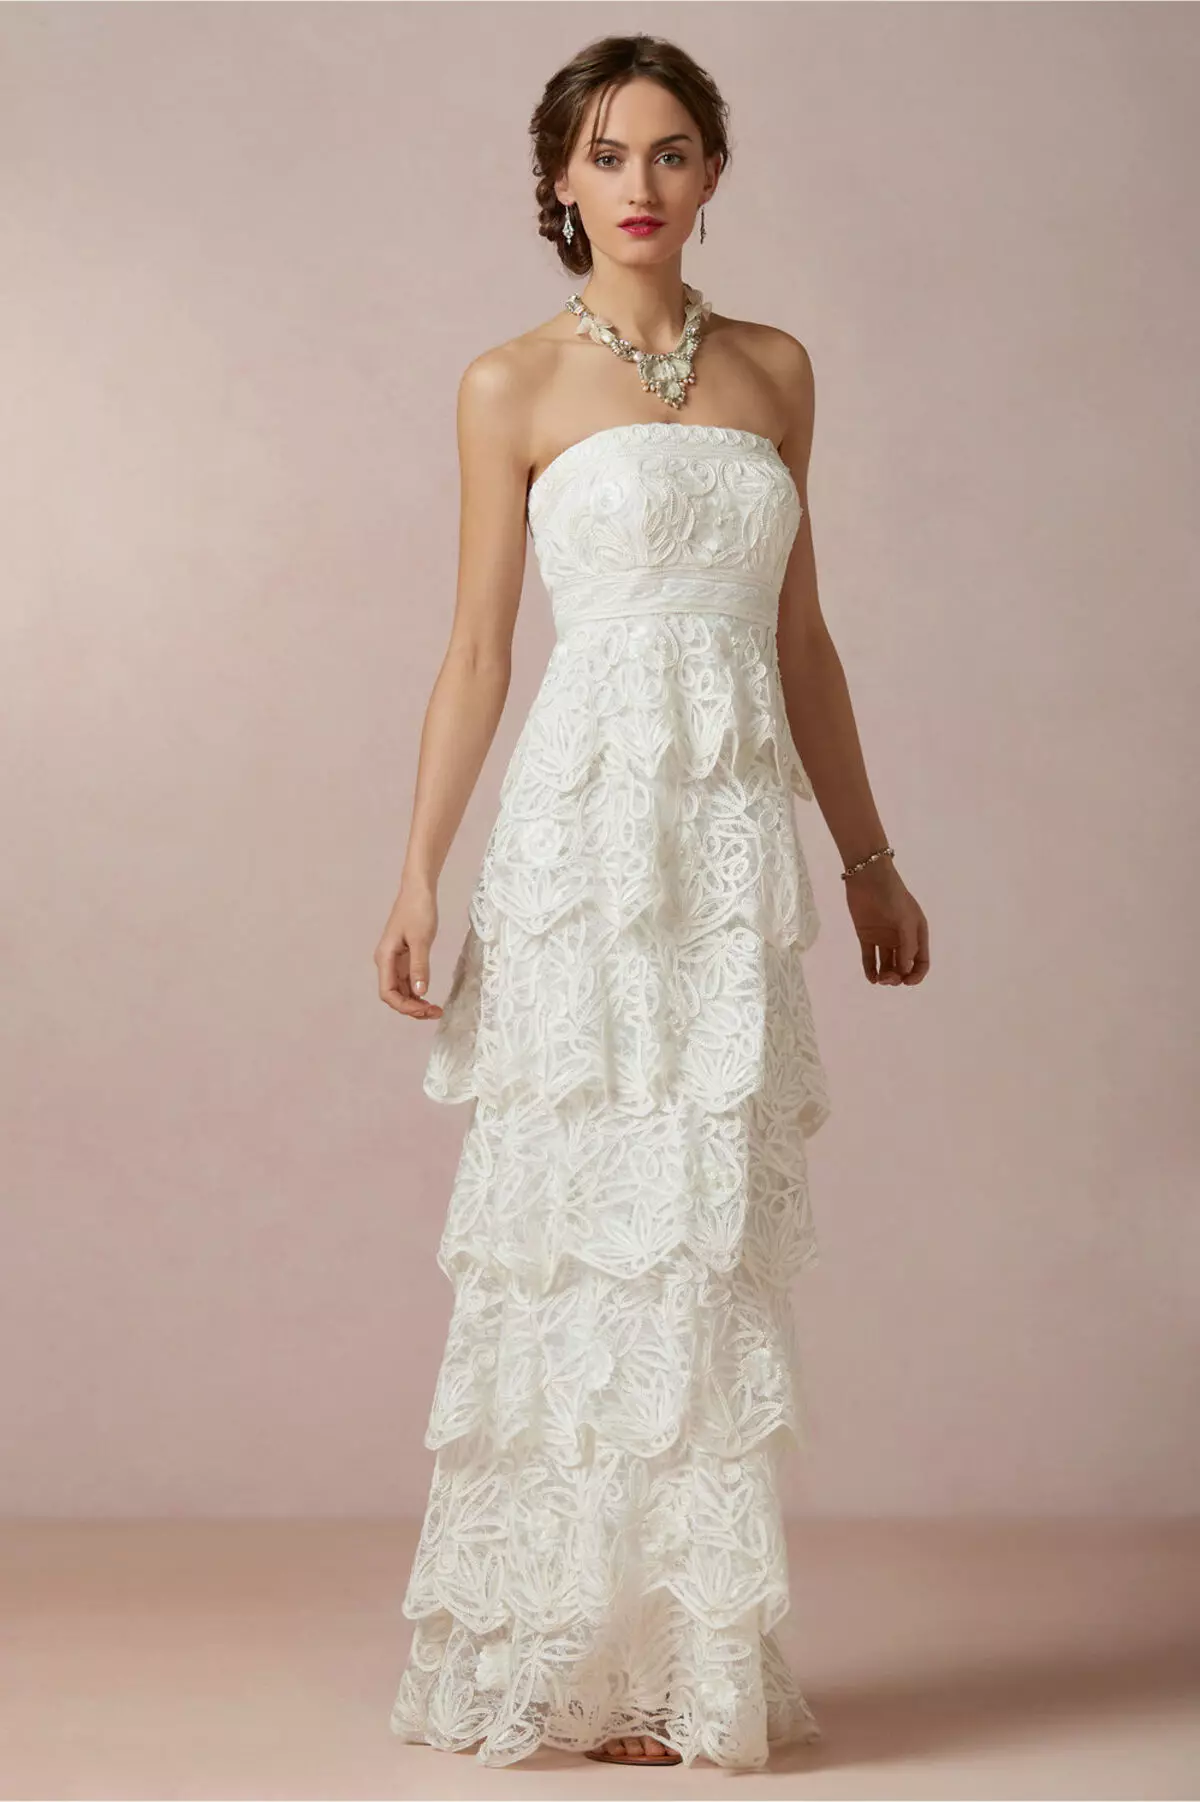 Wedding dress from lace